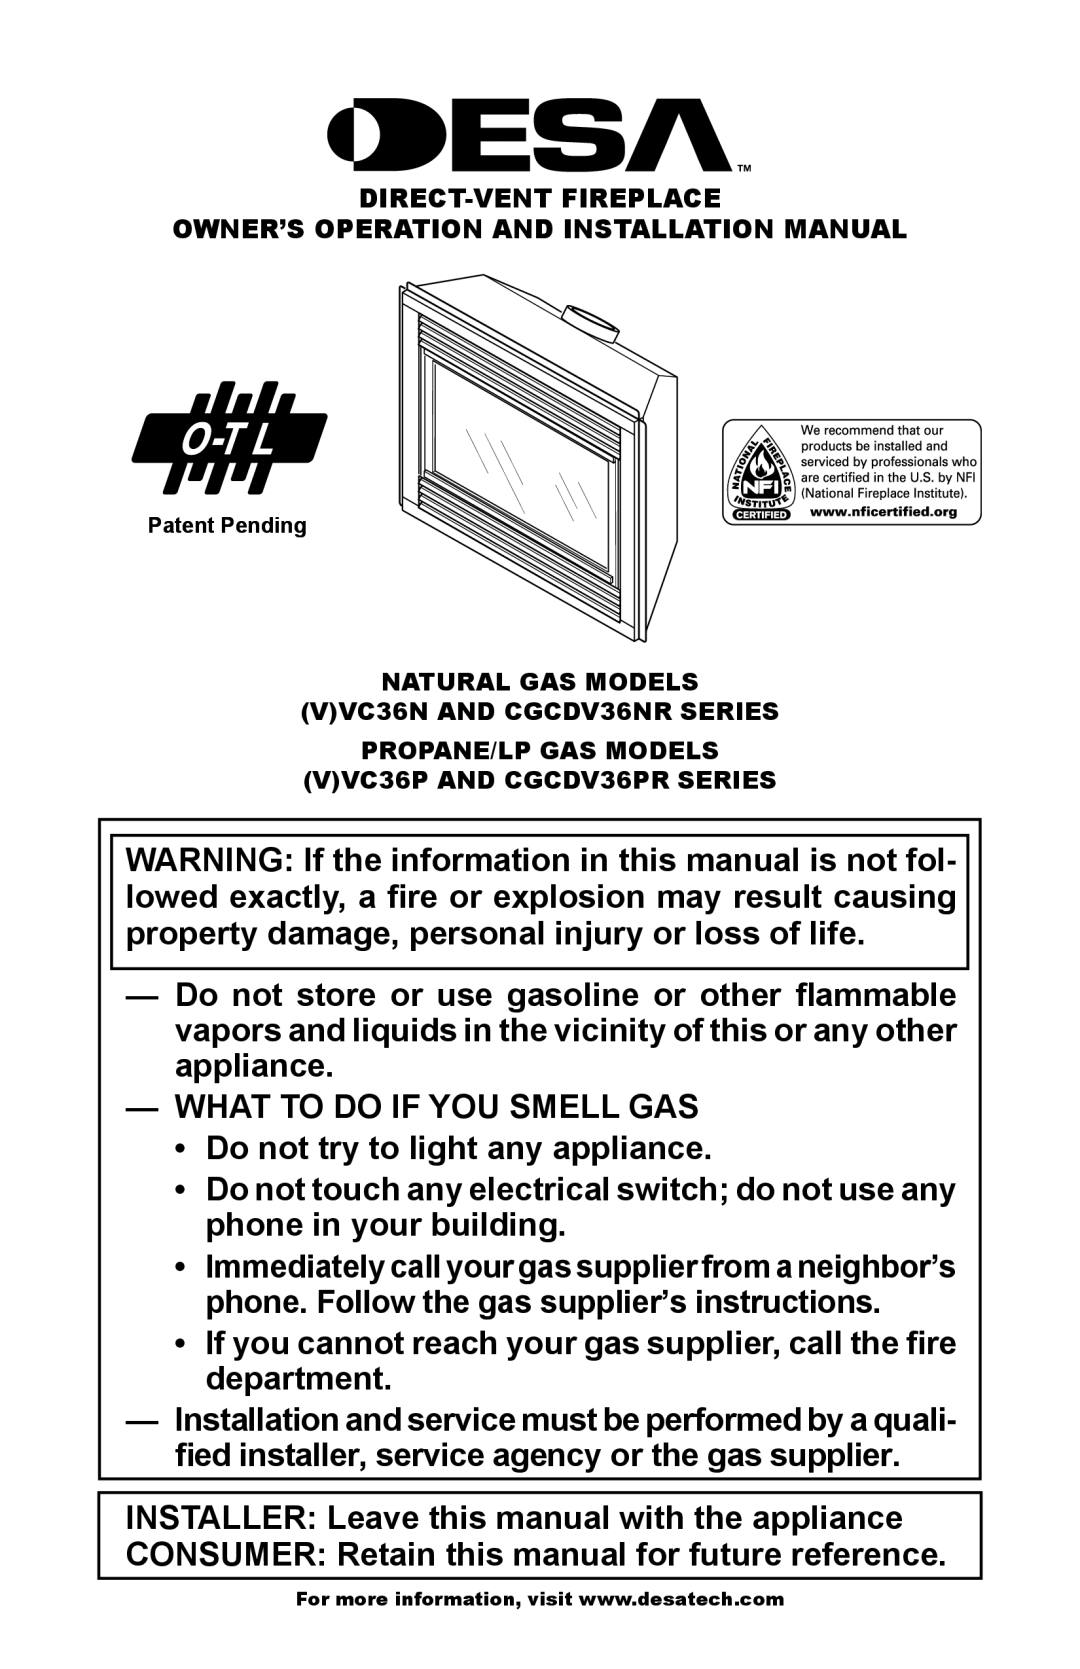 Desa VC36N, C GCDV36NR, VC36P, C GCDV36PR, (V)VC36P Series installation manual What To Do If You Smell Gas 